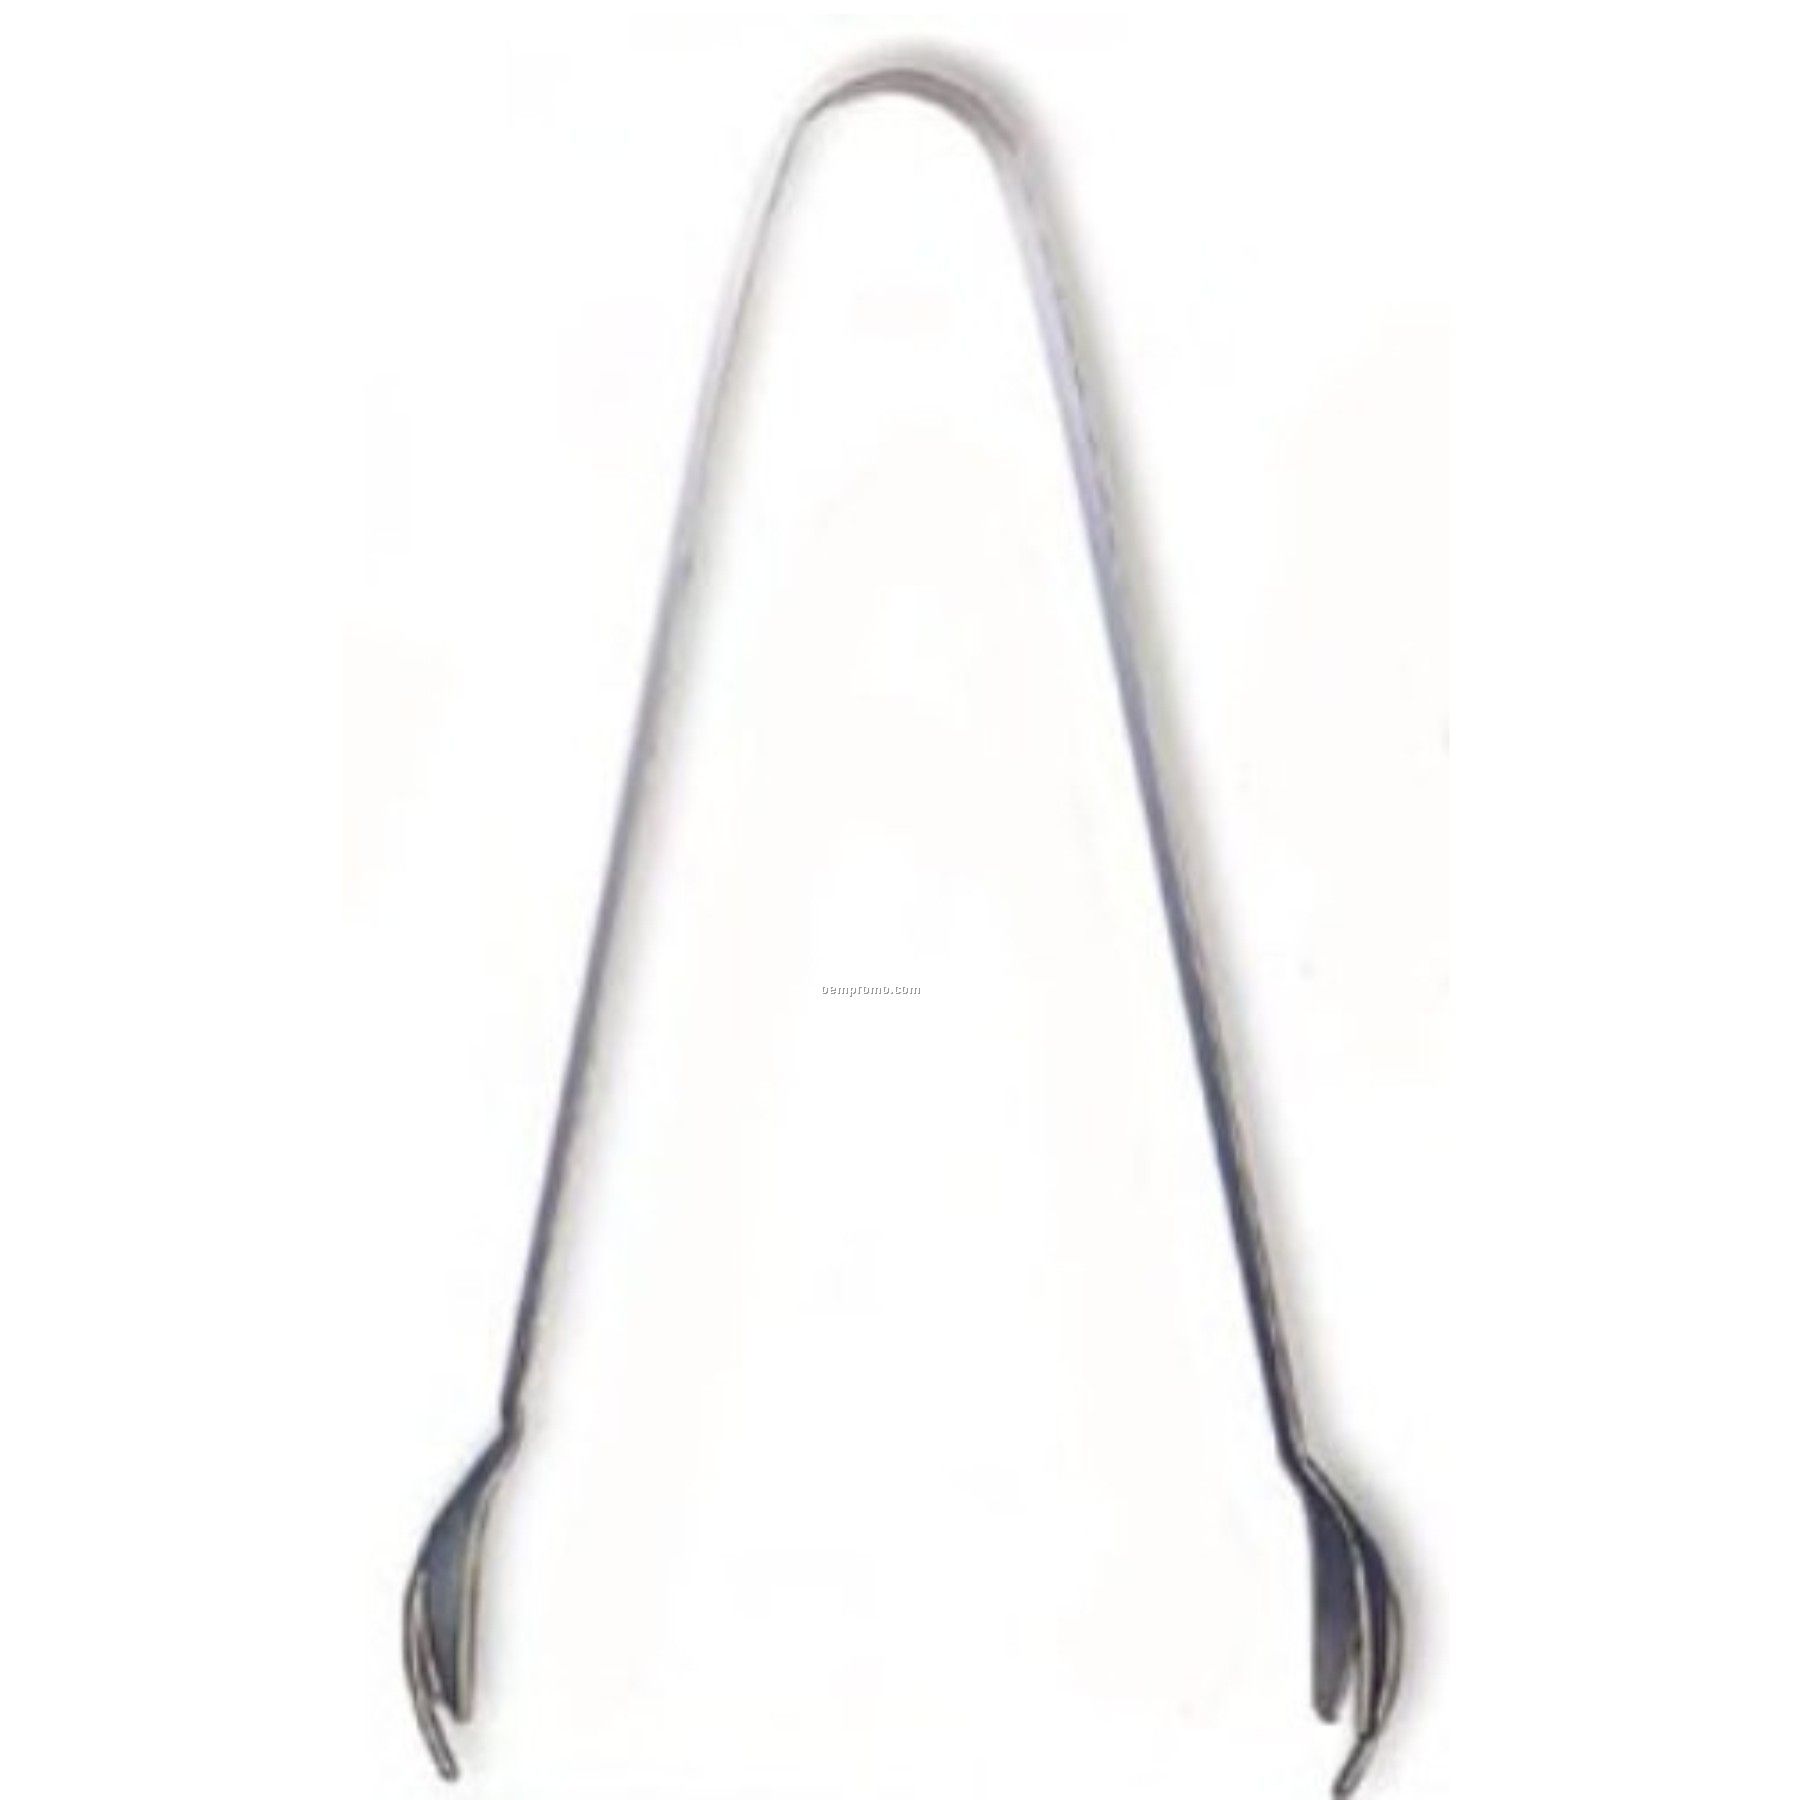 Stainless Steel Big Ice Tongs